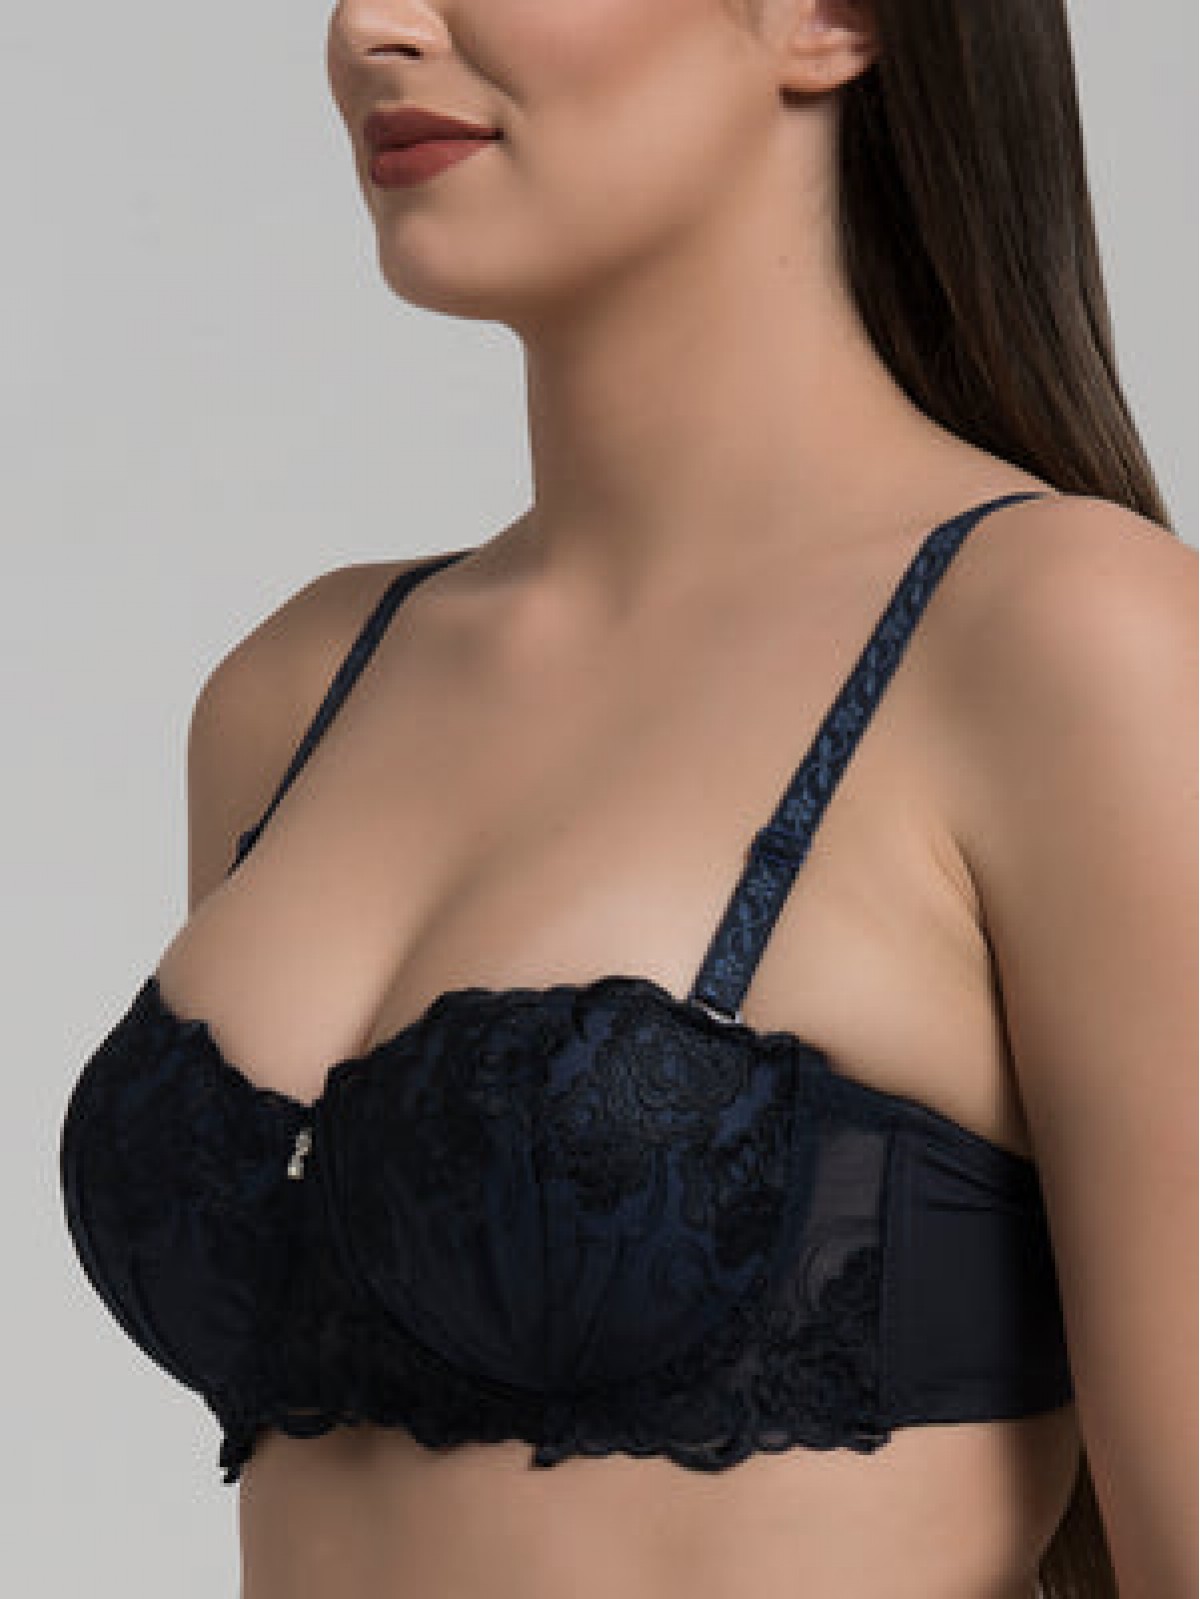 Naughty Comfy Balconette Brassiere